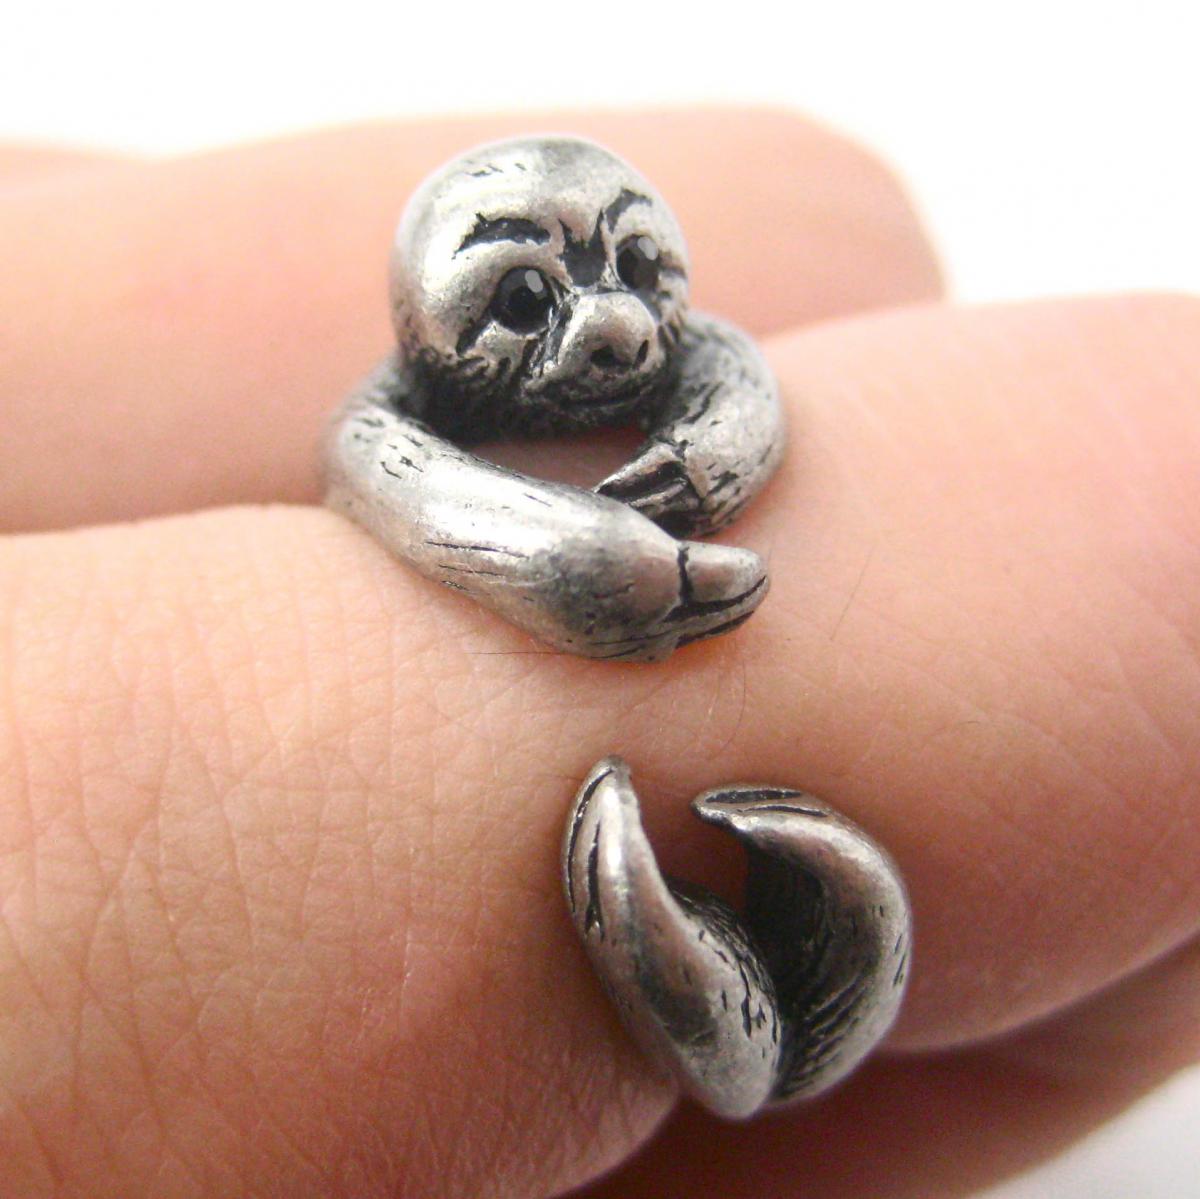 Realistic Sloth Animal Wrap Around Hug Ring In Silver - Sizes 5 To 10 Available